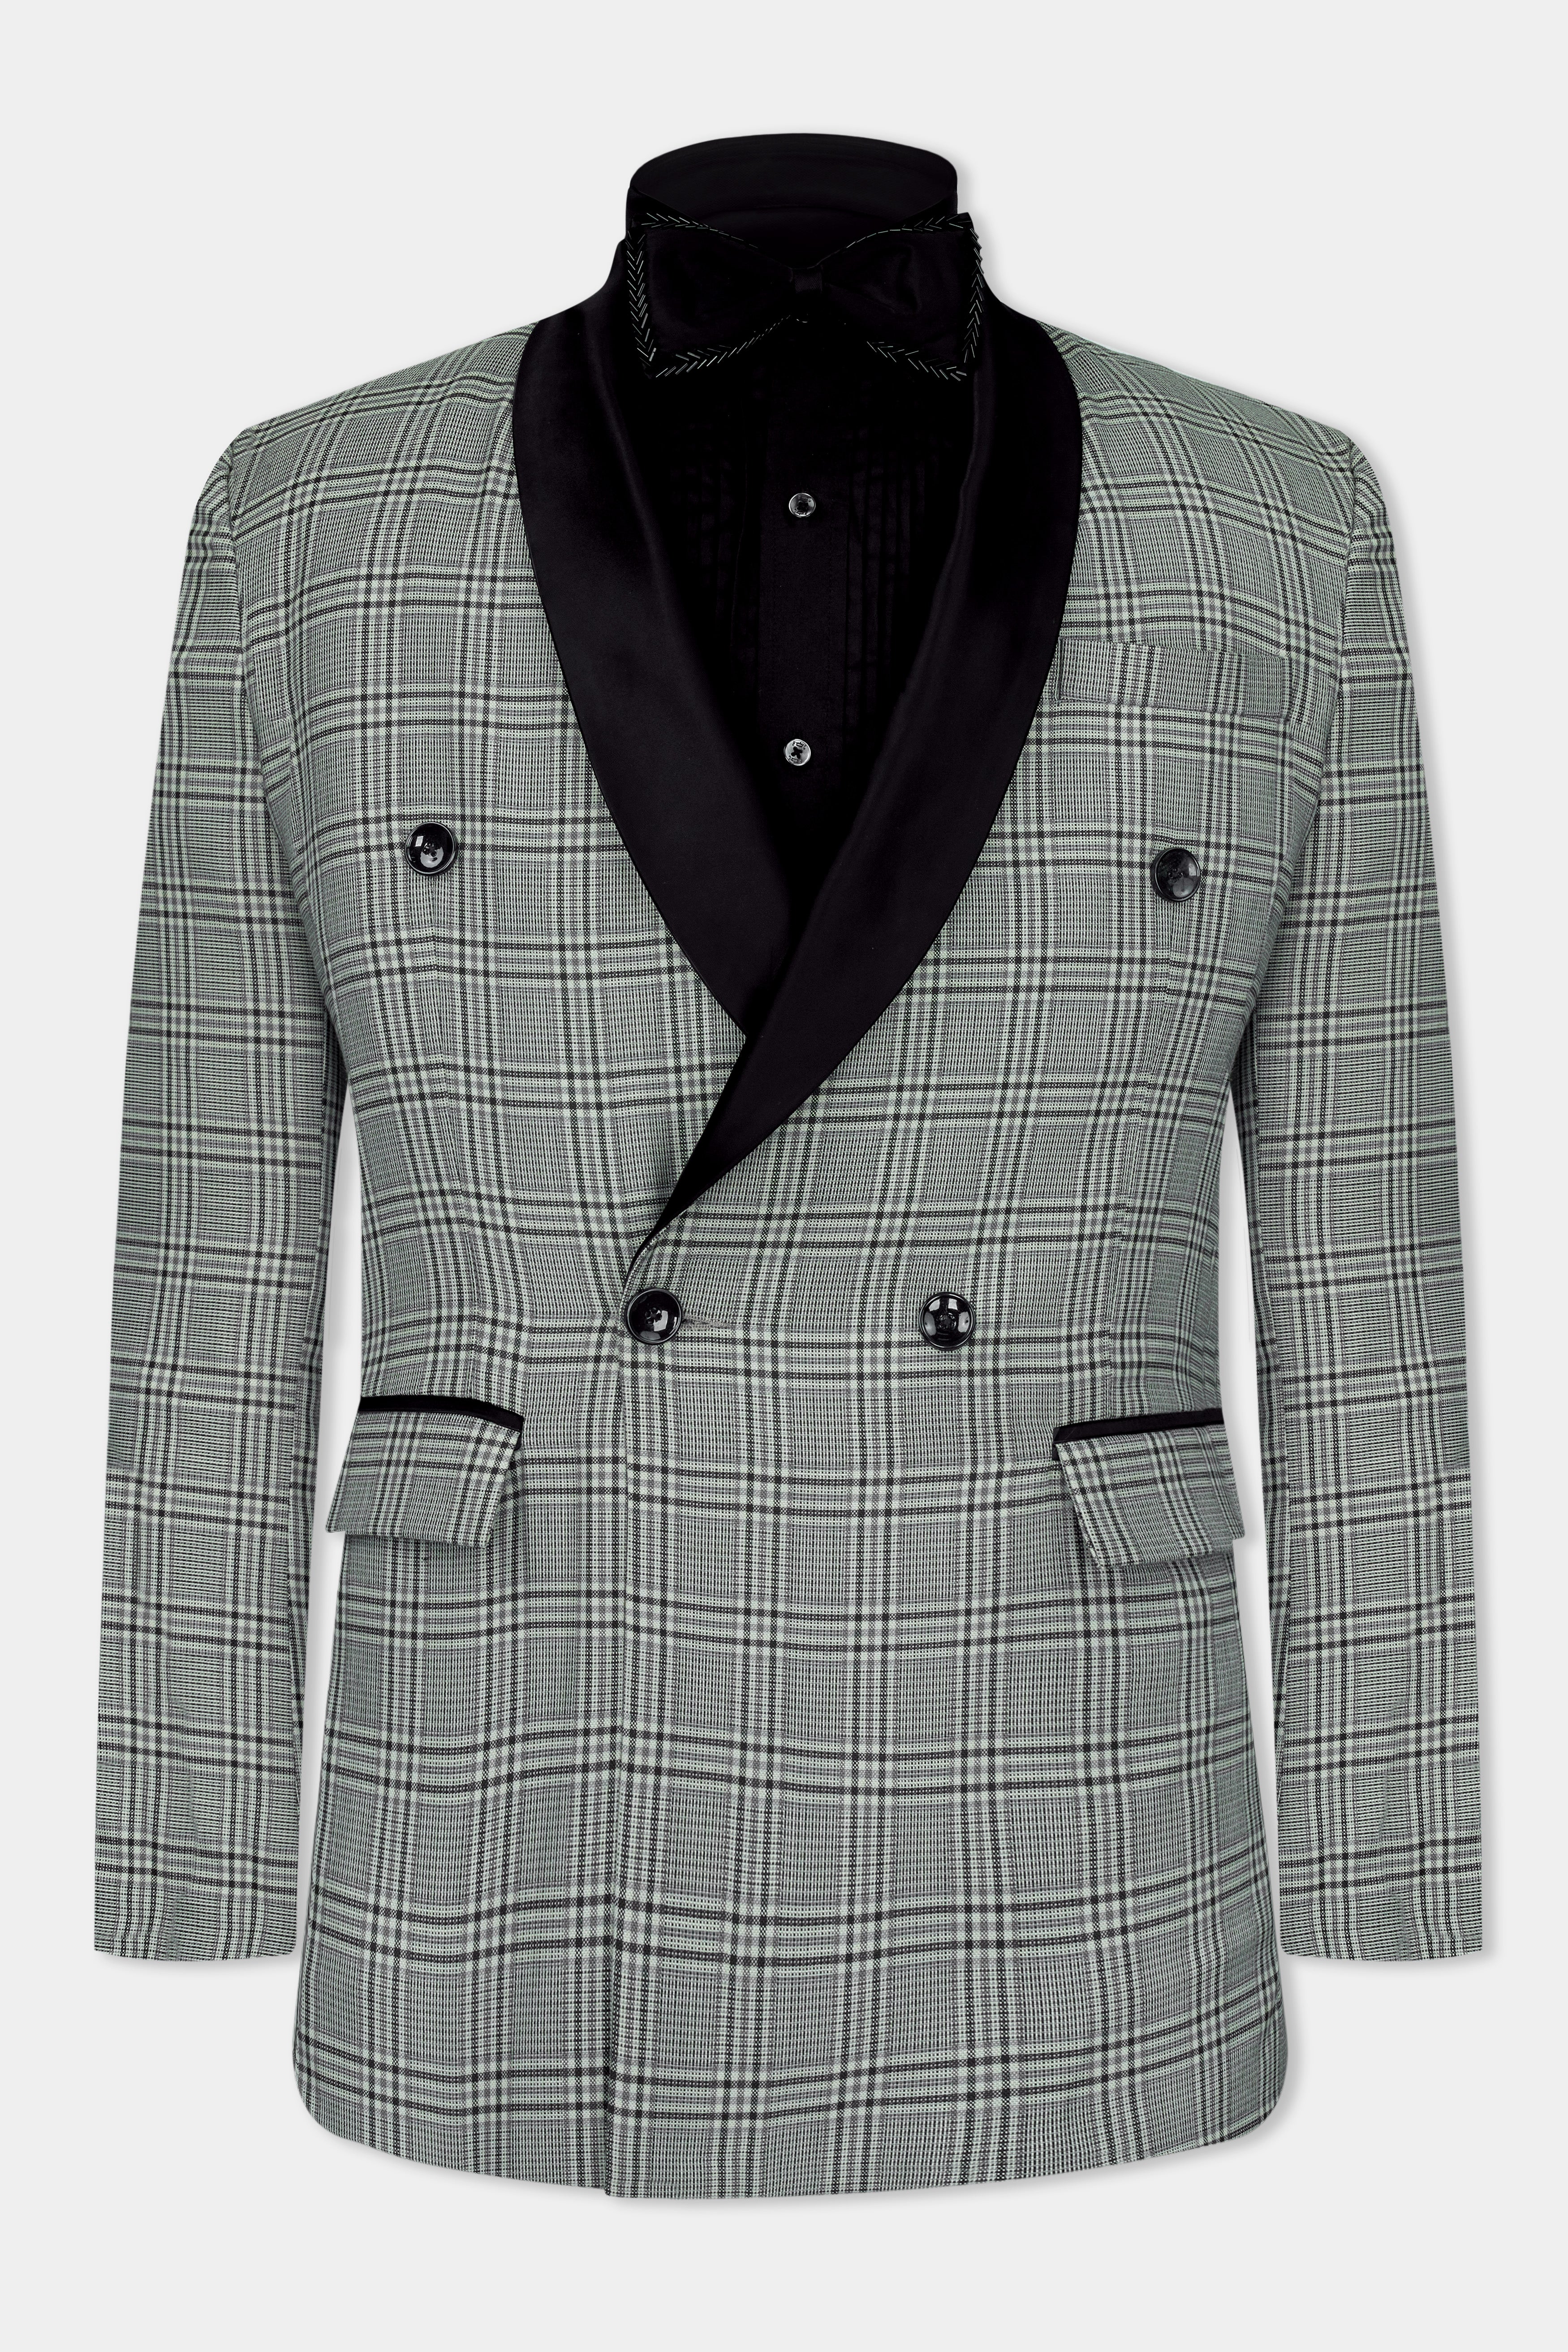 Flint Gray Plaid Wool Rich Double Breasted Designer Blazer BL2754-DB4-BKL-D141-36, BL2754-DB4-BKL-D141-38, BL2754-DB4-BKL-D141-40, BL2754-DB4-BKL-D141-42, BL2754-DB4-BKL-D141-44, BL2754-DB4-BKL-D141-46, BL2754-DB4-BKL-D141-48, BL2754-DB4-BKL-D141-50, BL2754-DB4-BKL-D141-52, BL2754-DB4-BKL-D141-54, BL2754-DB4-BKL-D141-56, BL2754-DB4-BKL-D141-58, BL2754-DB4-BKL-D141-60